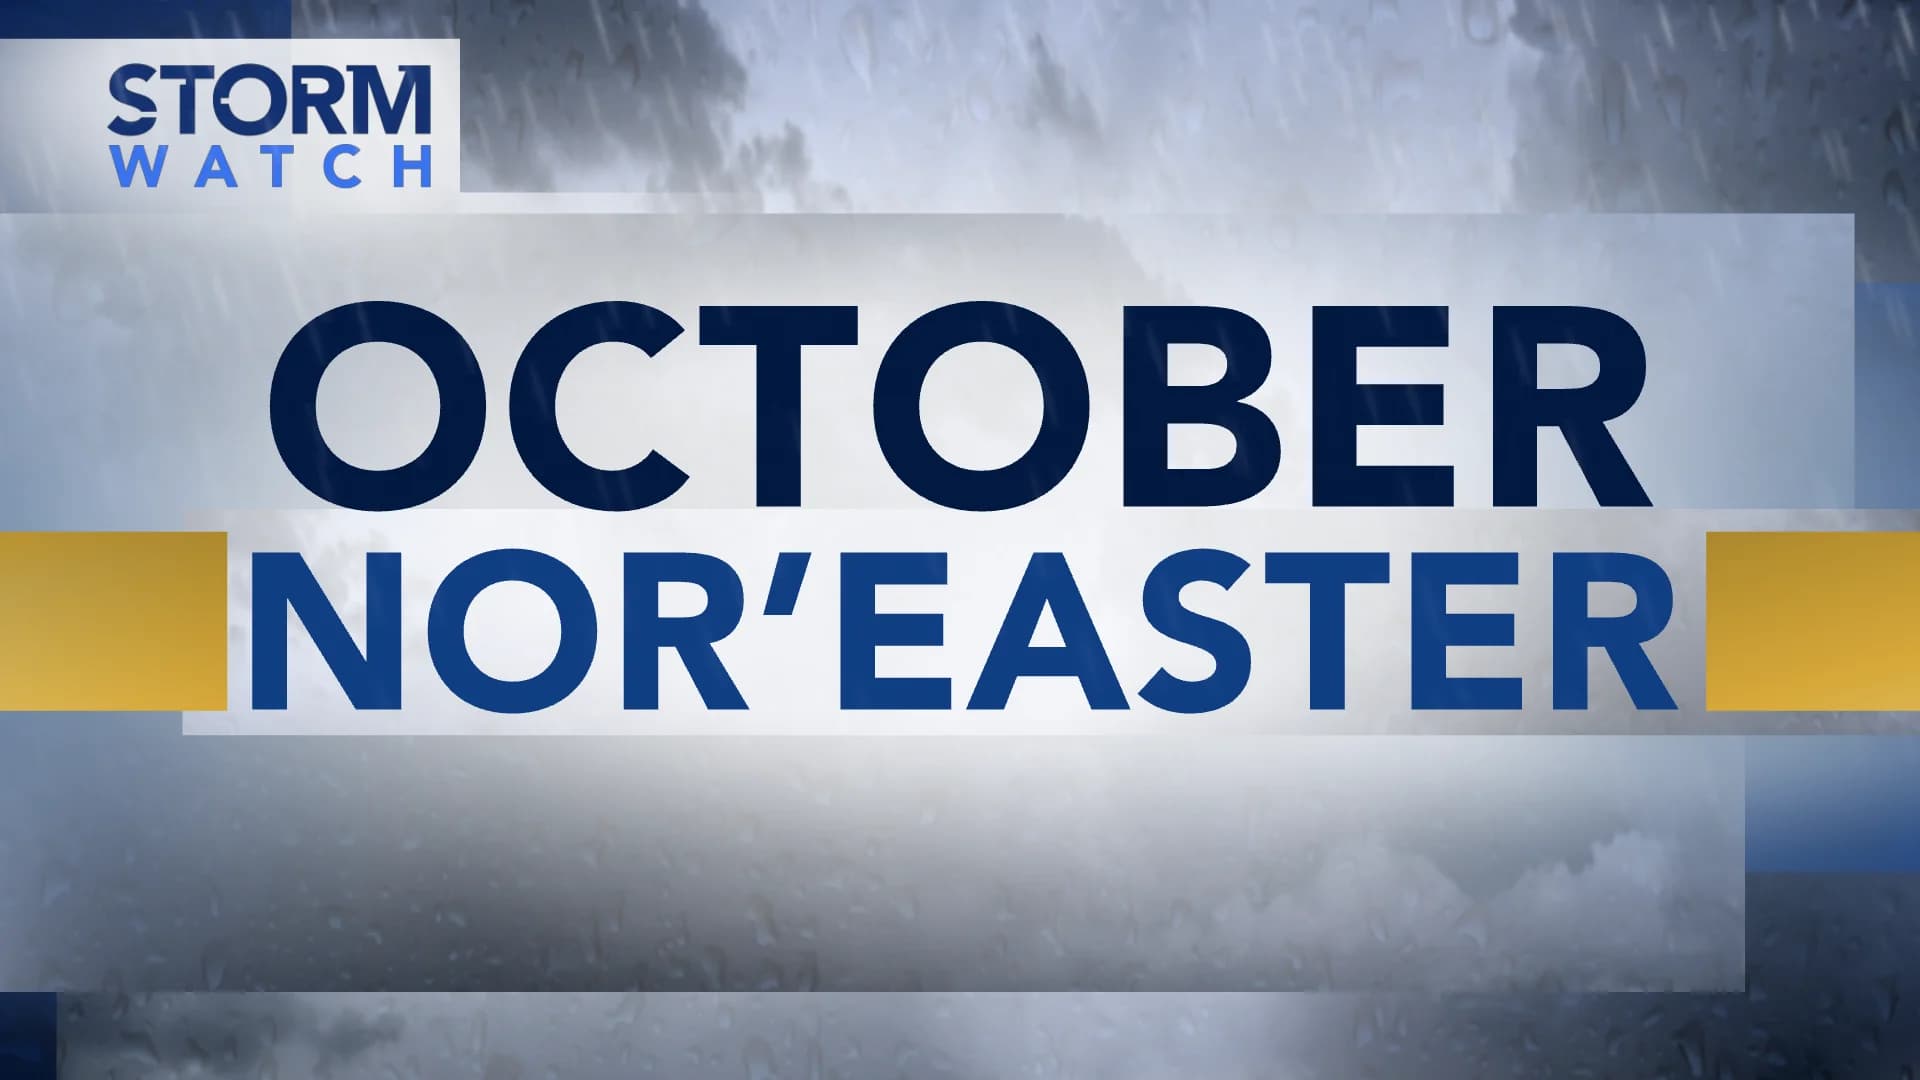 Live Updates: Tracking the October Nor'easter